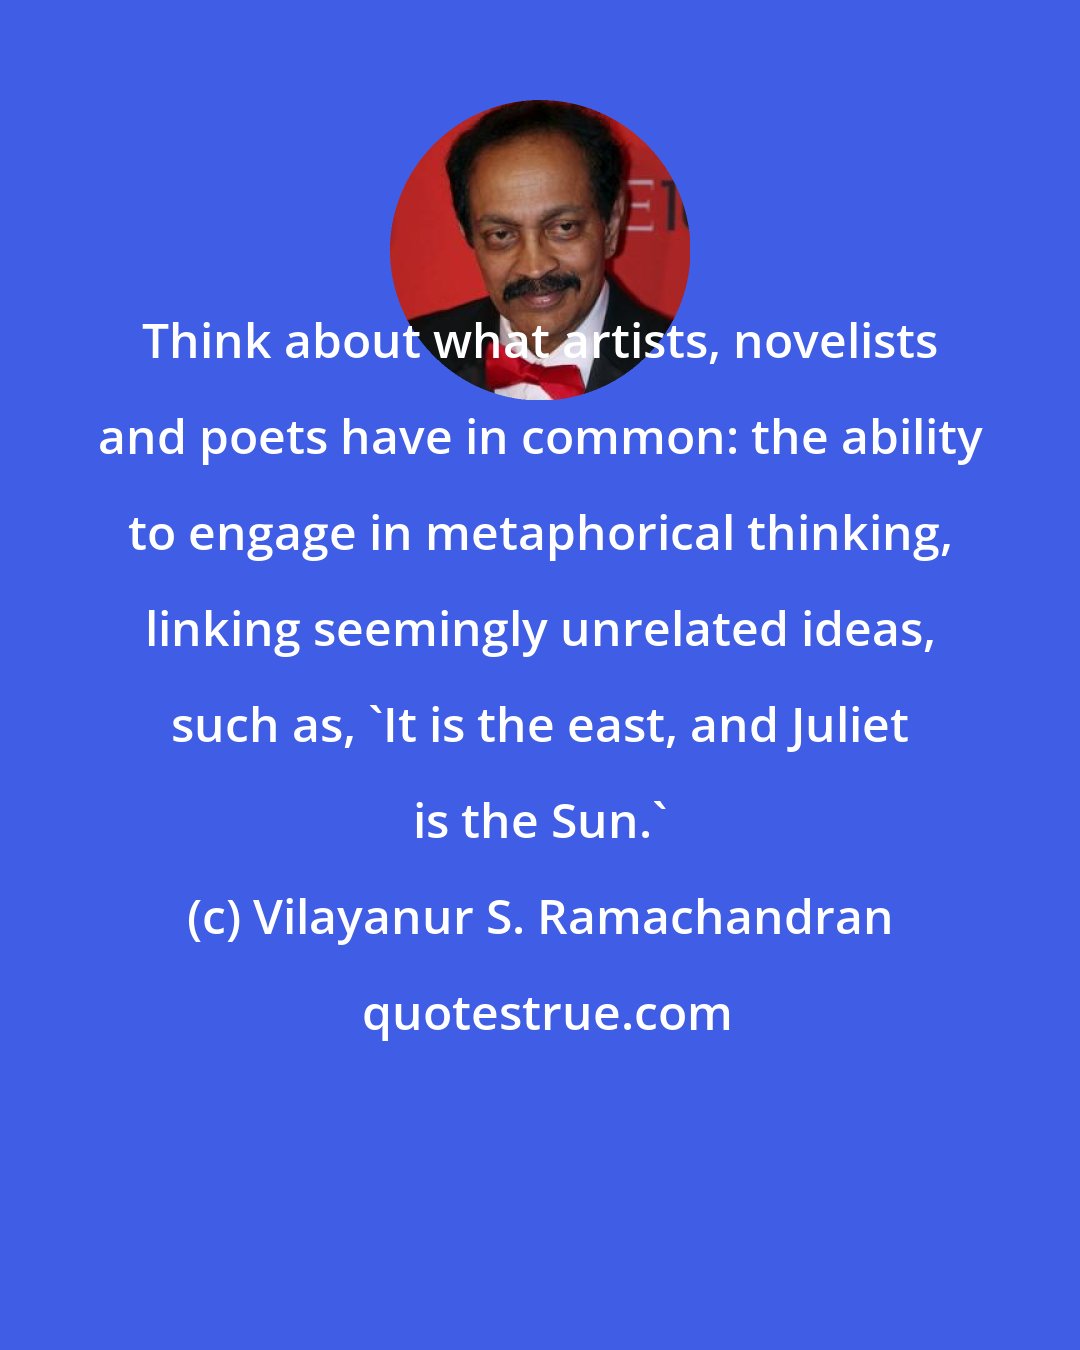 Vilayanur S. Ramachandran: Think about what artists, novelists and poets have in common: the ability to engage in metaphorical thinking, linking seemingly unrelated ideas, such as, 'It is the east, and Juliet is the Sun.'